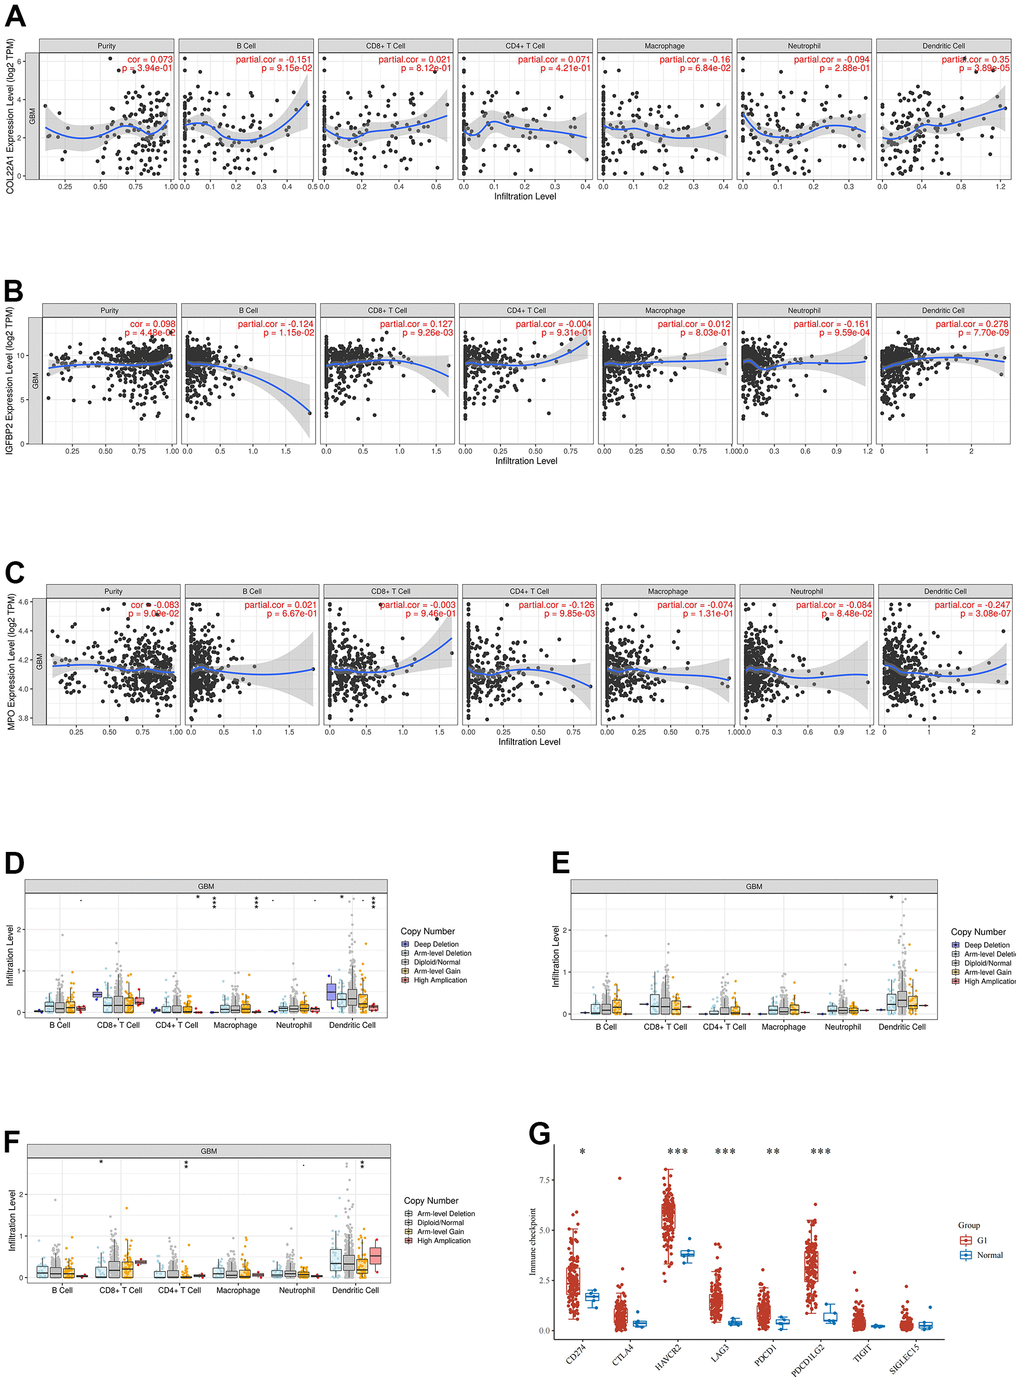 Analysis of immune cell infiltration, SCNA, and immune checkpoint expression in grade 4 diffuse gliomas. (A–C) Analysis of immune cell infiltration associated with COL22A1, IGFBP2, and MPO expression levels in grade 4 diffuse gliomas. (D–F) Association of SCNAs of COL22A1 (D), IGFBP2 (E), and MPO (F) with immune cell infiltration in grade 4 diffuse gliomas. (G) Immune checkpoint analysis of grade 4 diffuse gliomas vs normal brain.